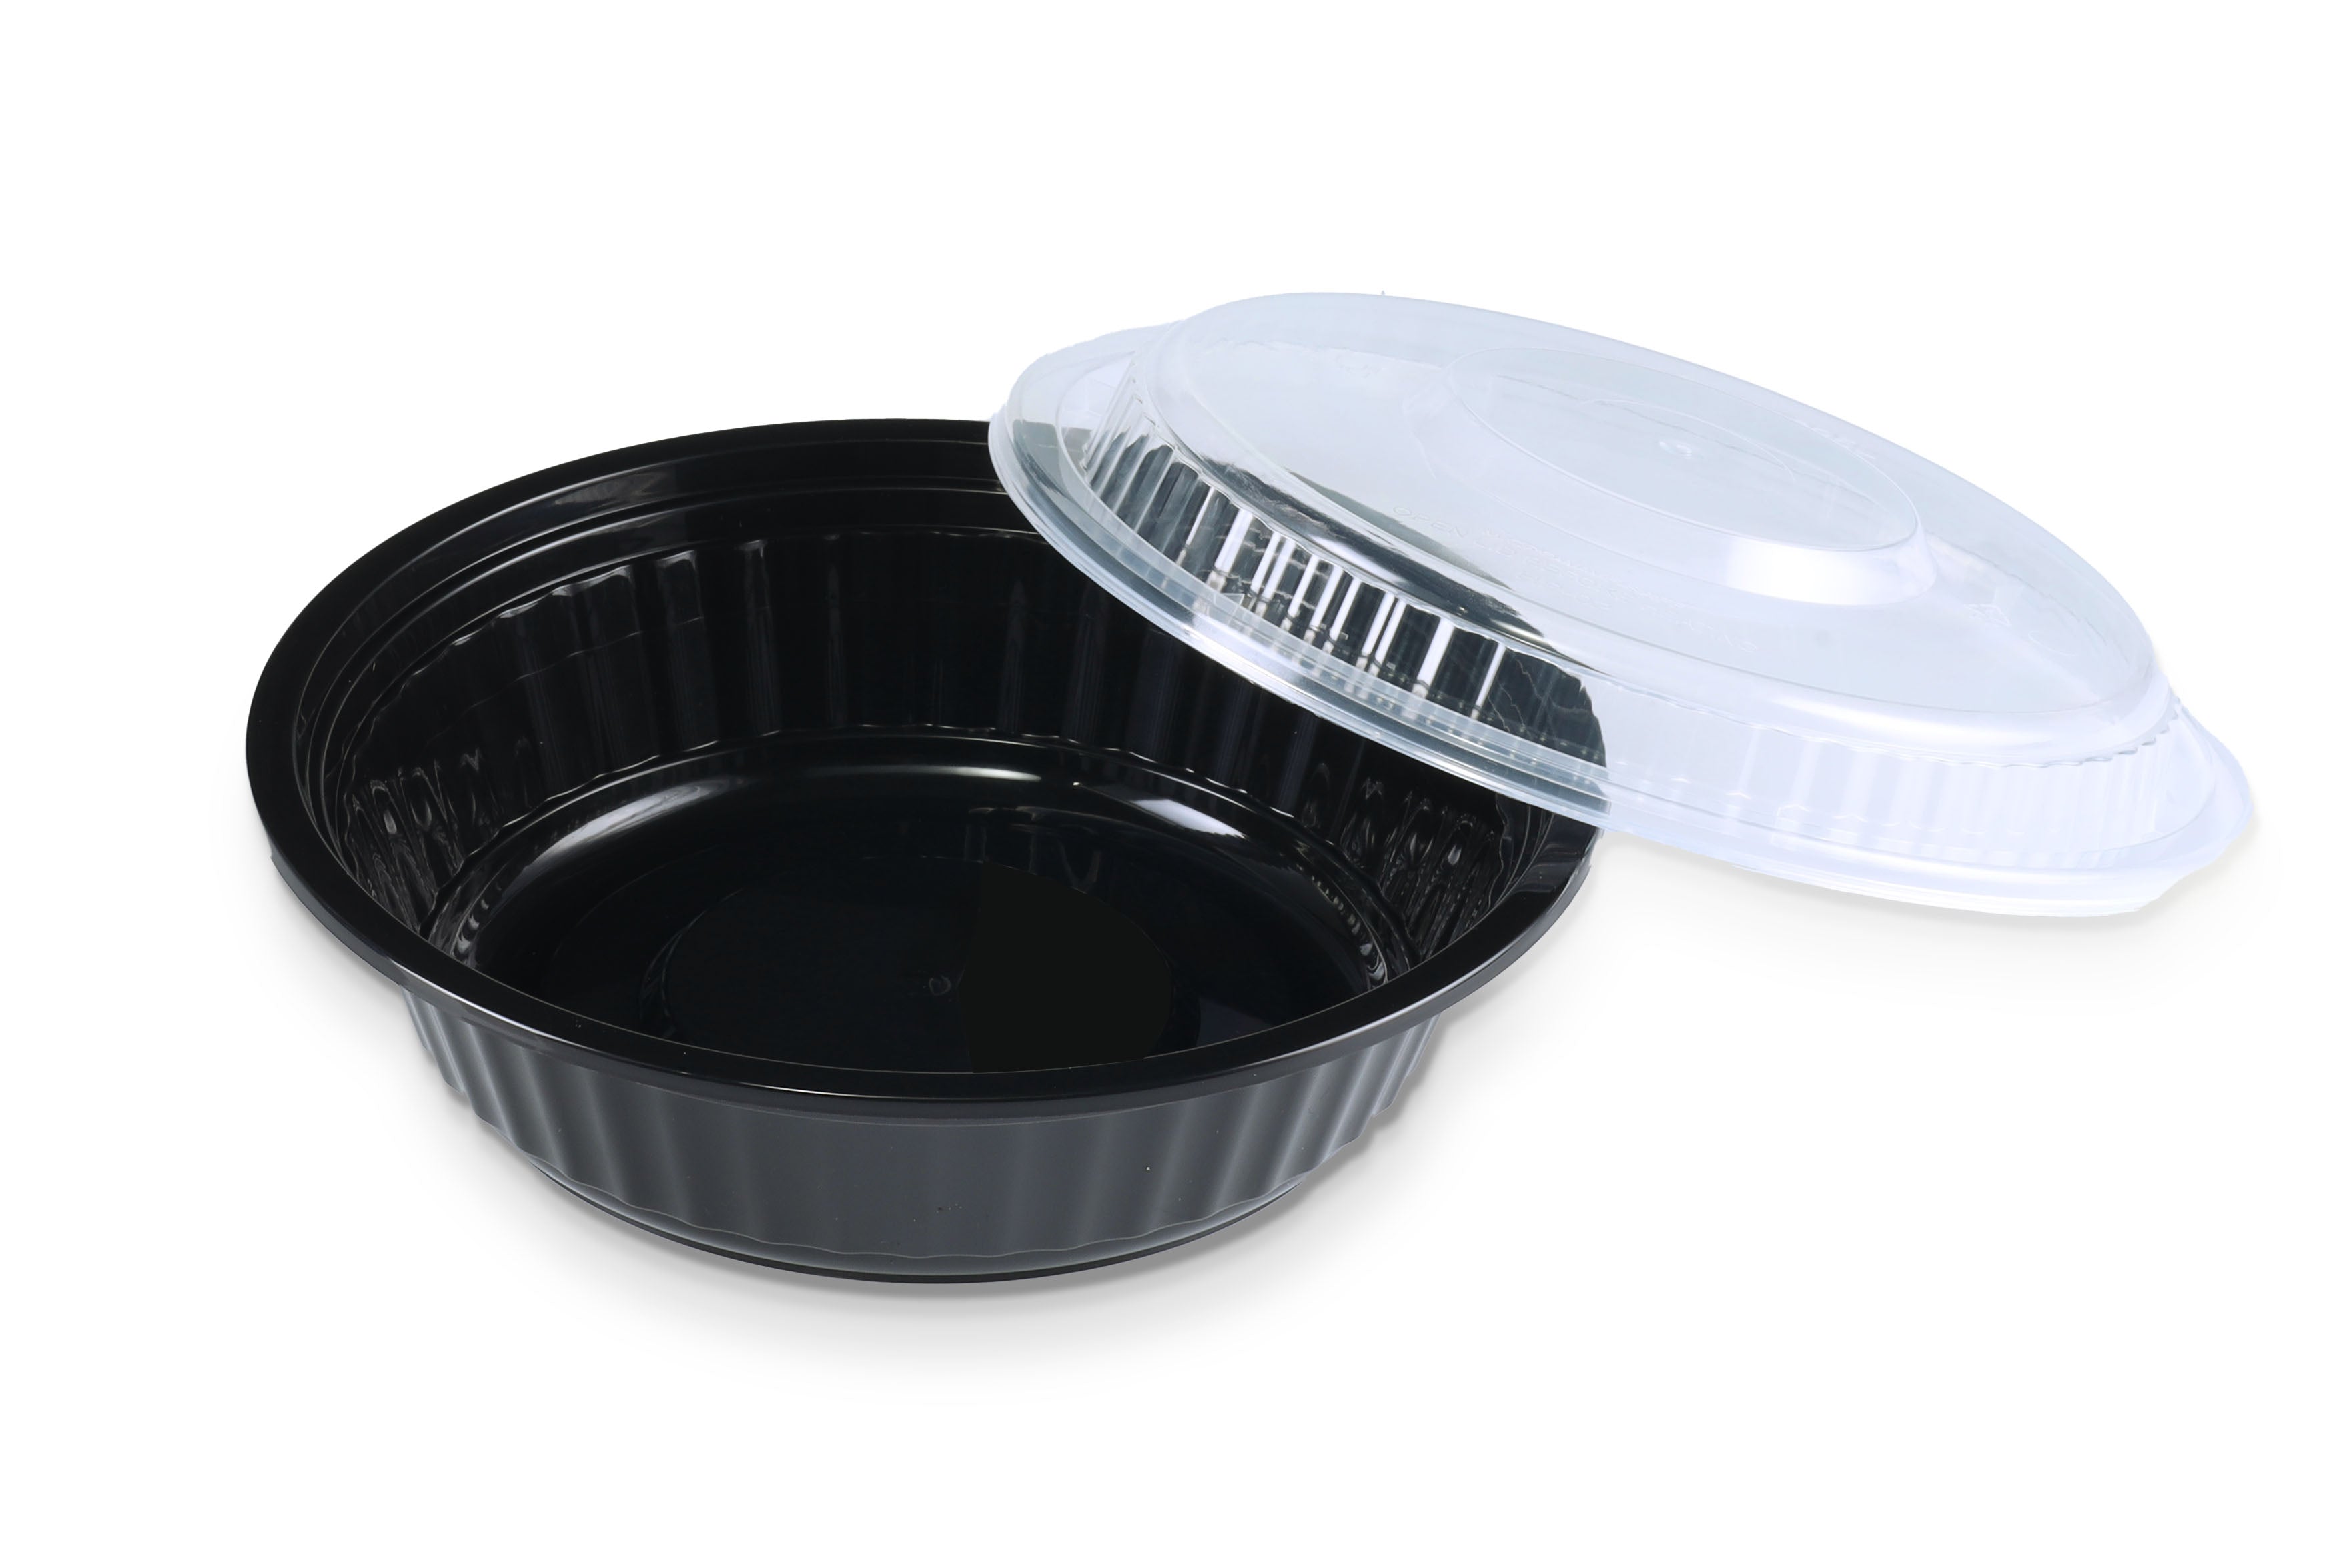 Sazon 16 oz Round Meal Prep Containers, Set of 150